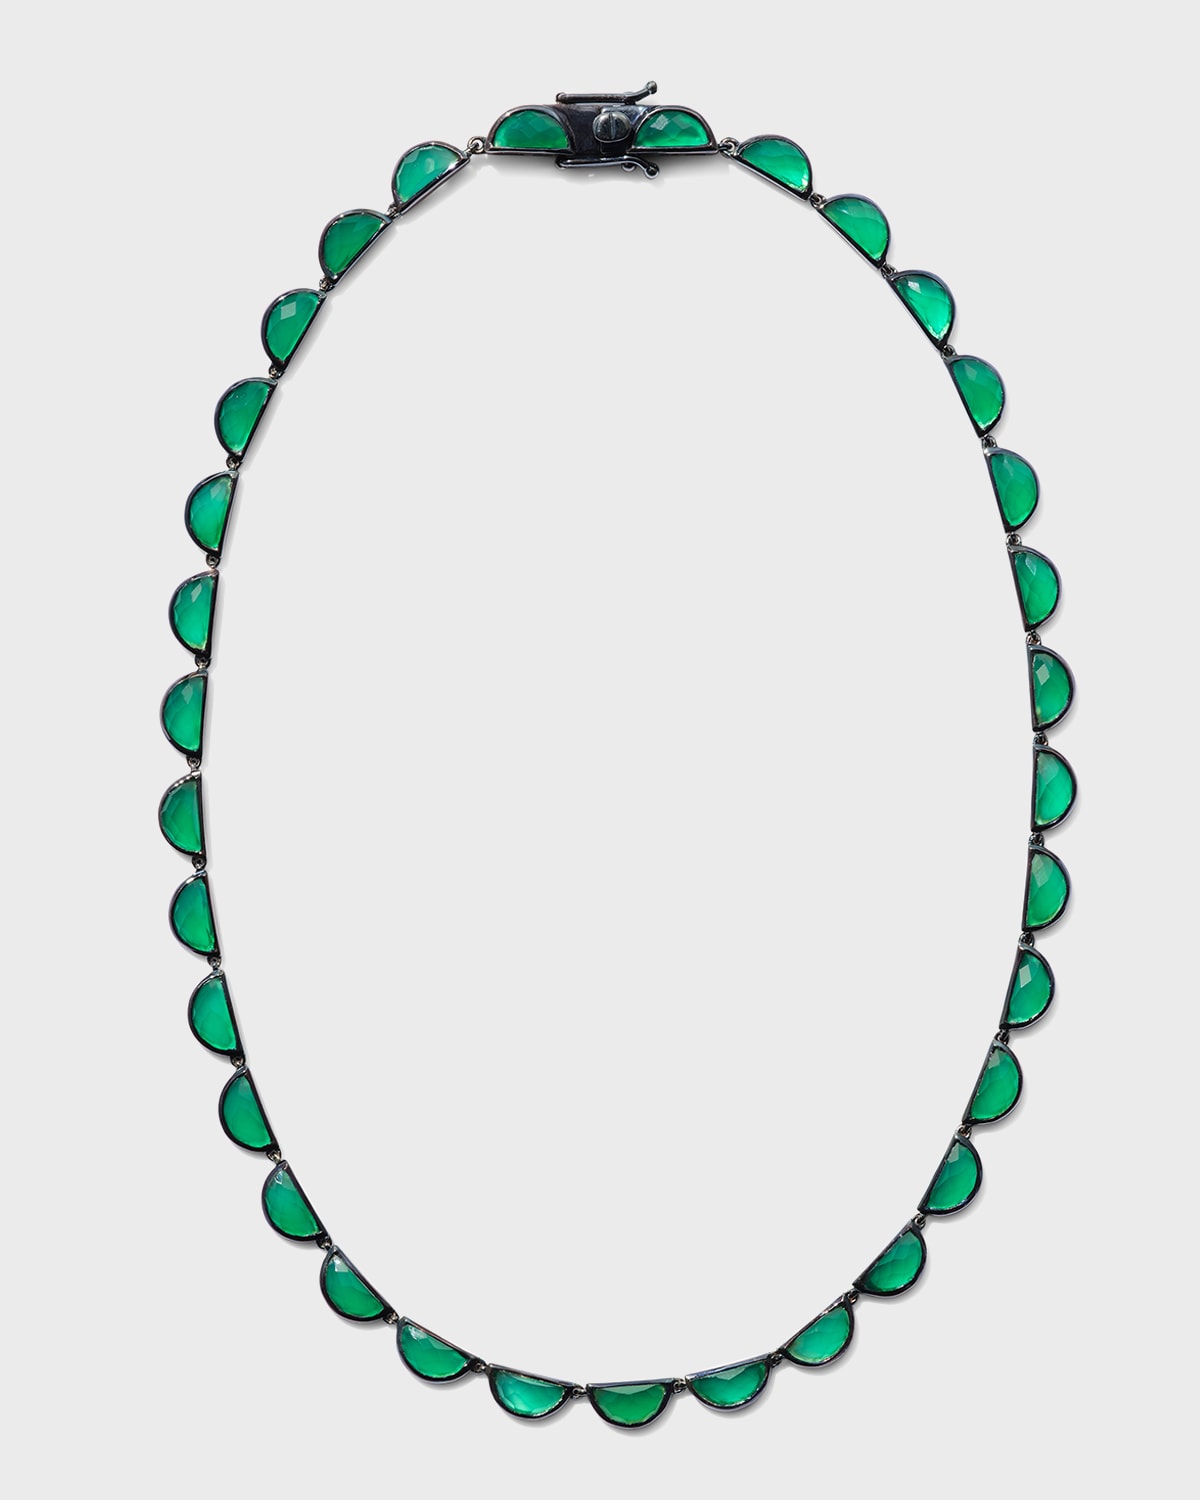 Large Scallop Riviere Necklace in Green Onyx